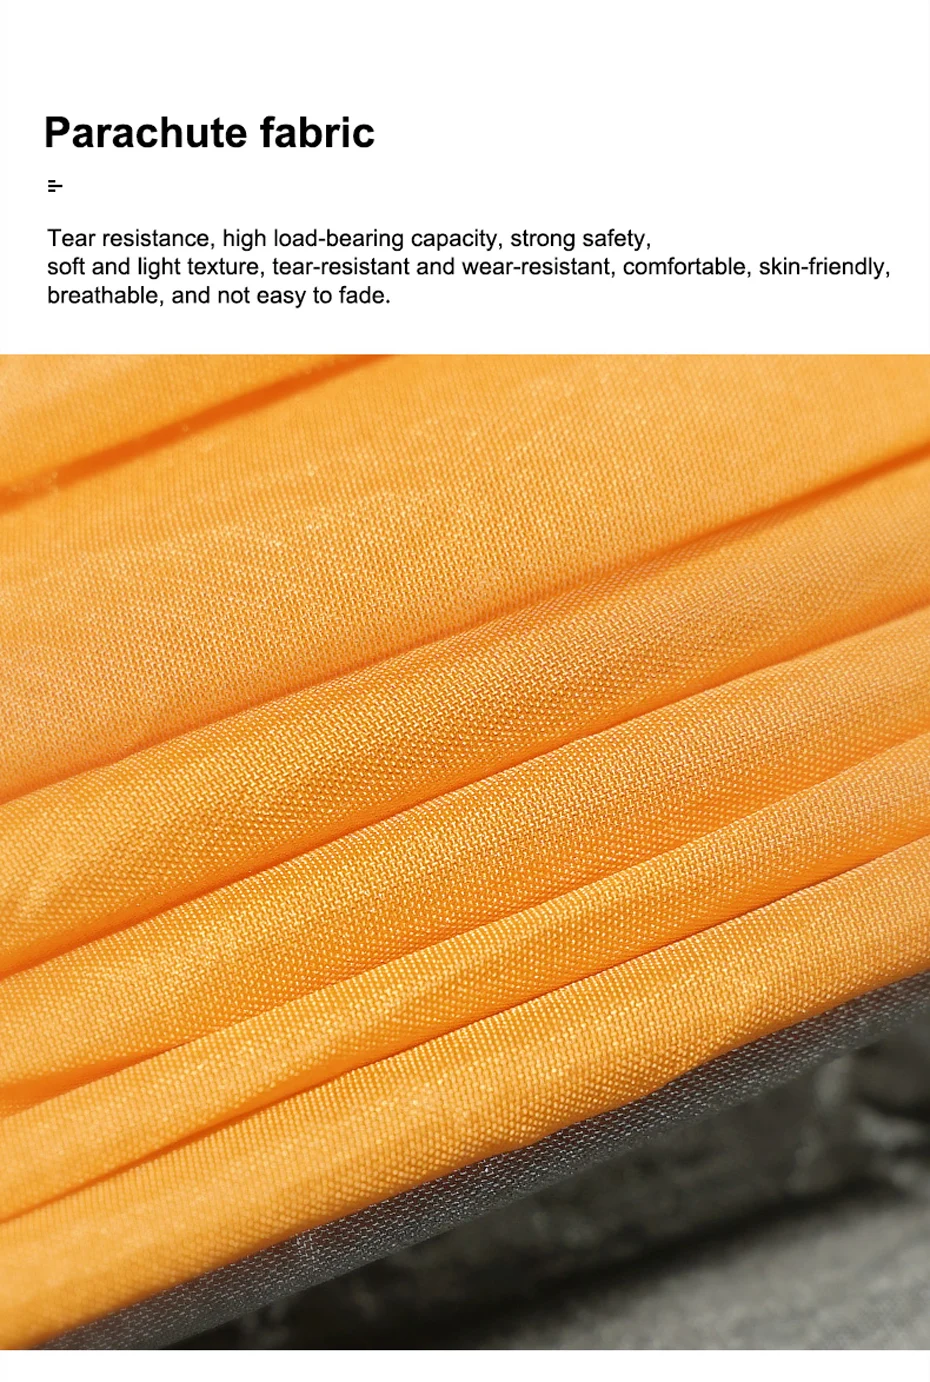 Tear-resistant Parachute Ccloth Hammock Wrinkled Nylon Outdoor Swing Household Double Anti-rollover Camping Spring Outing Safety